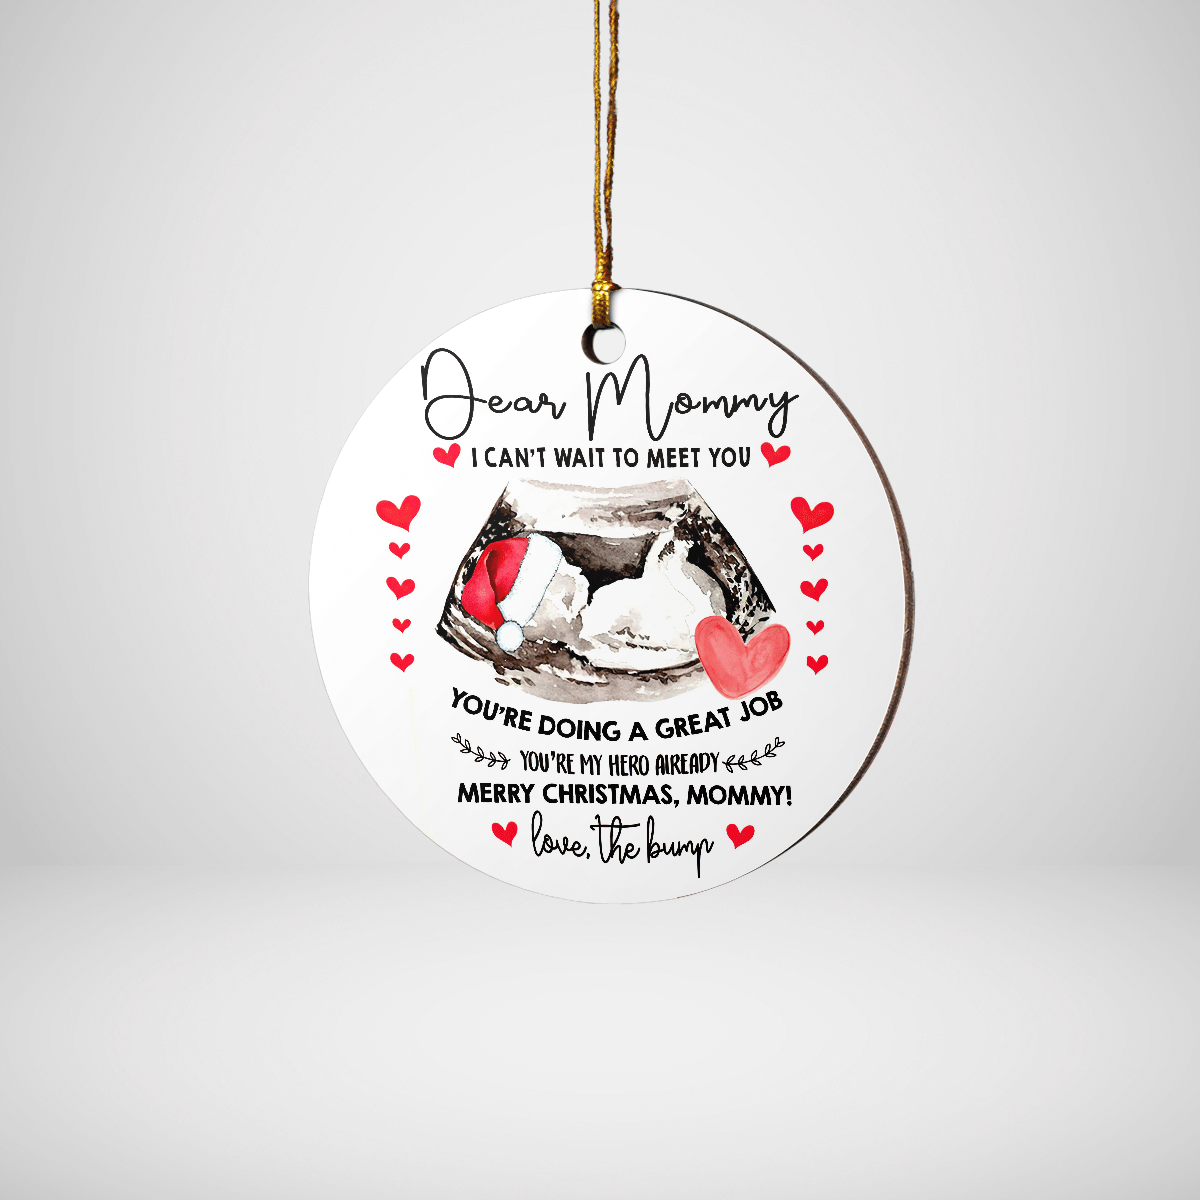 Dear Mommy I Can't Wait To Meet You Ornament